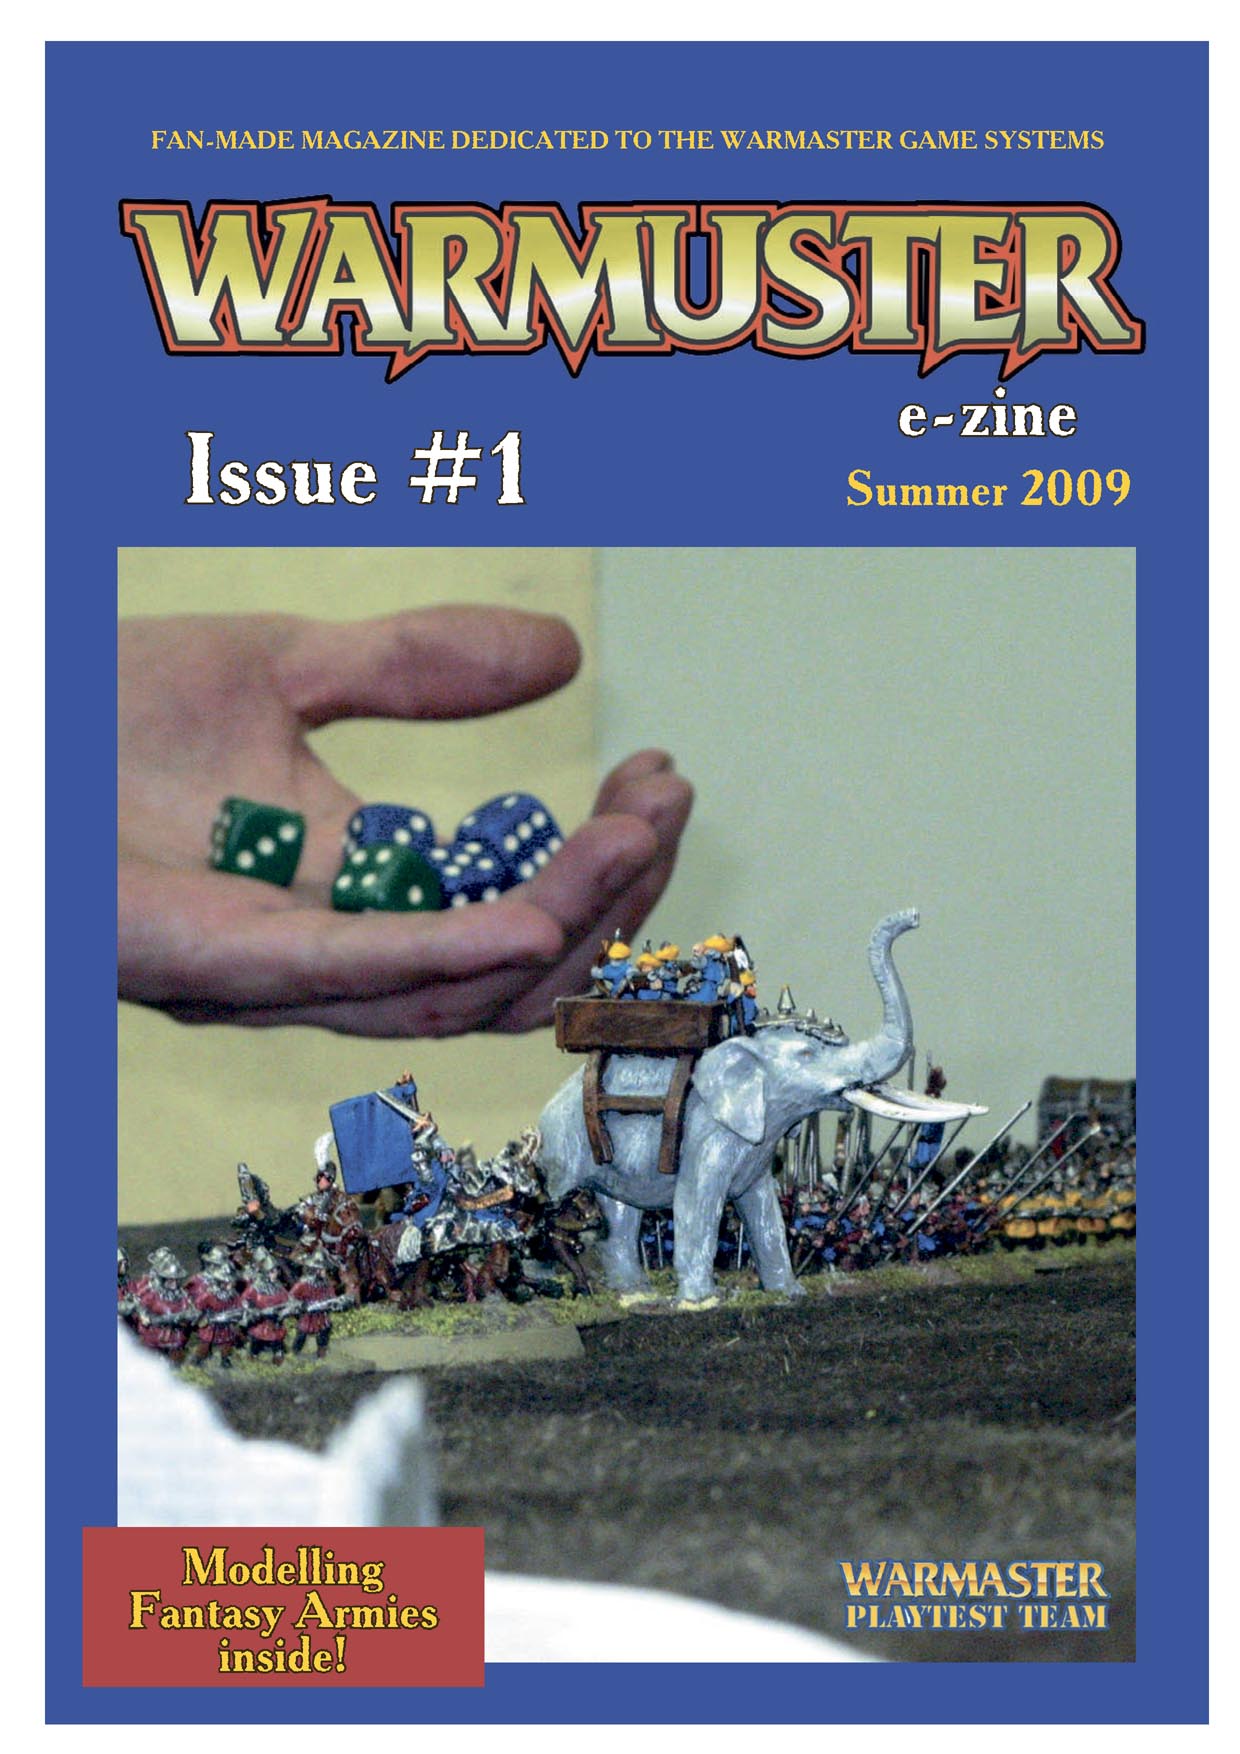 The inaugural issue of Warmuster